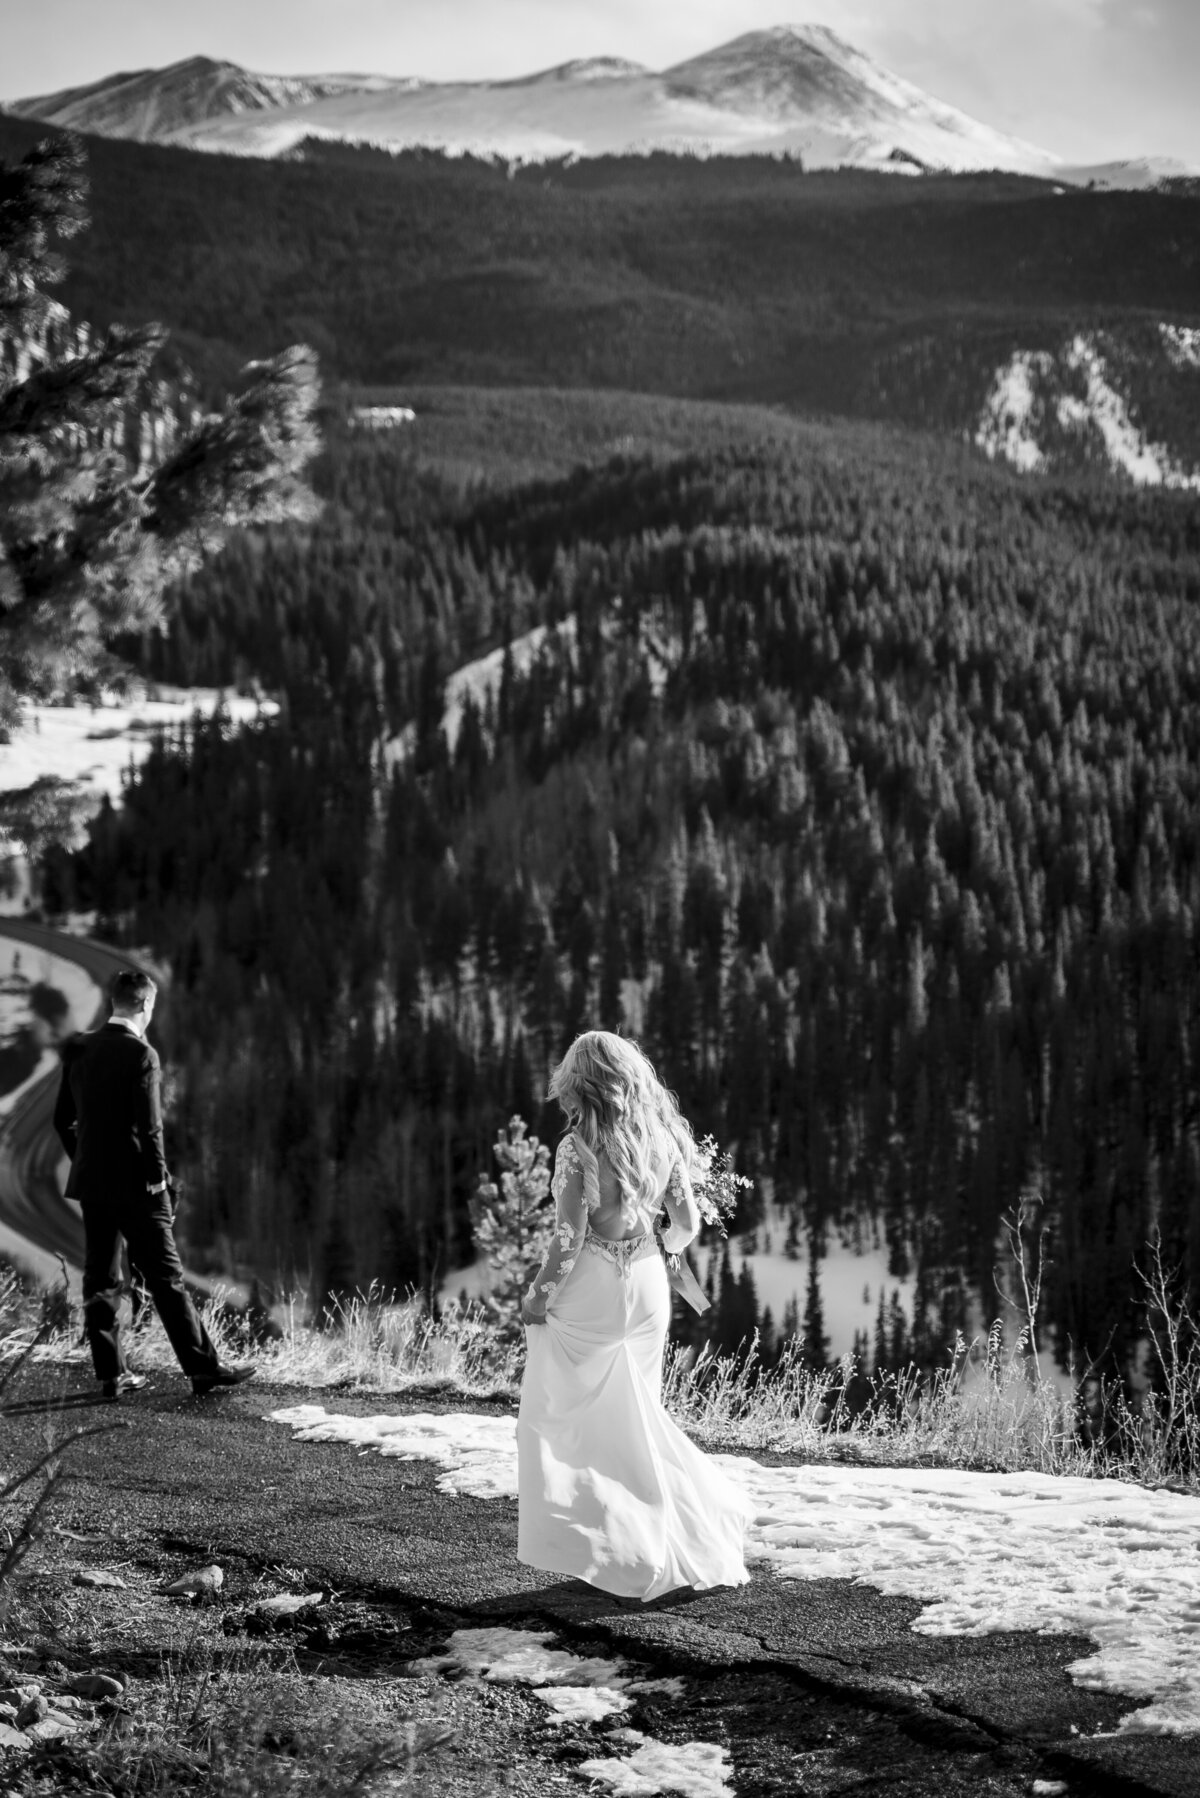 A bride approaches her groom for their first look on a snowy mountainside.